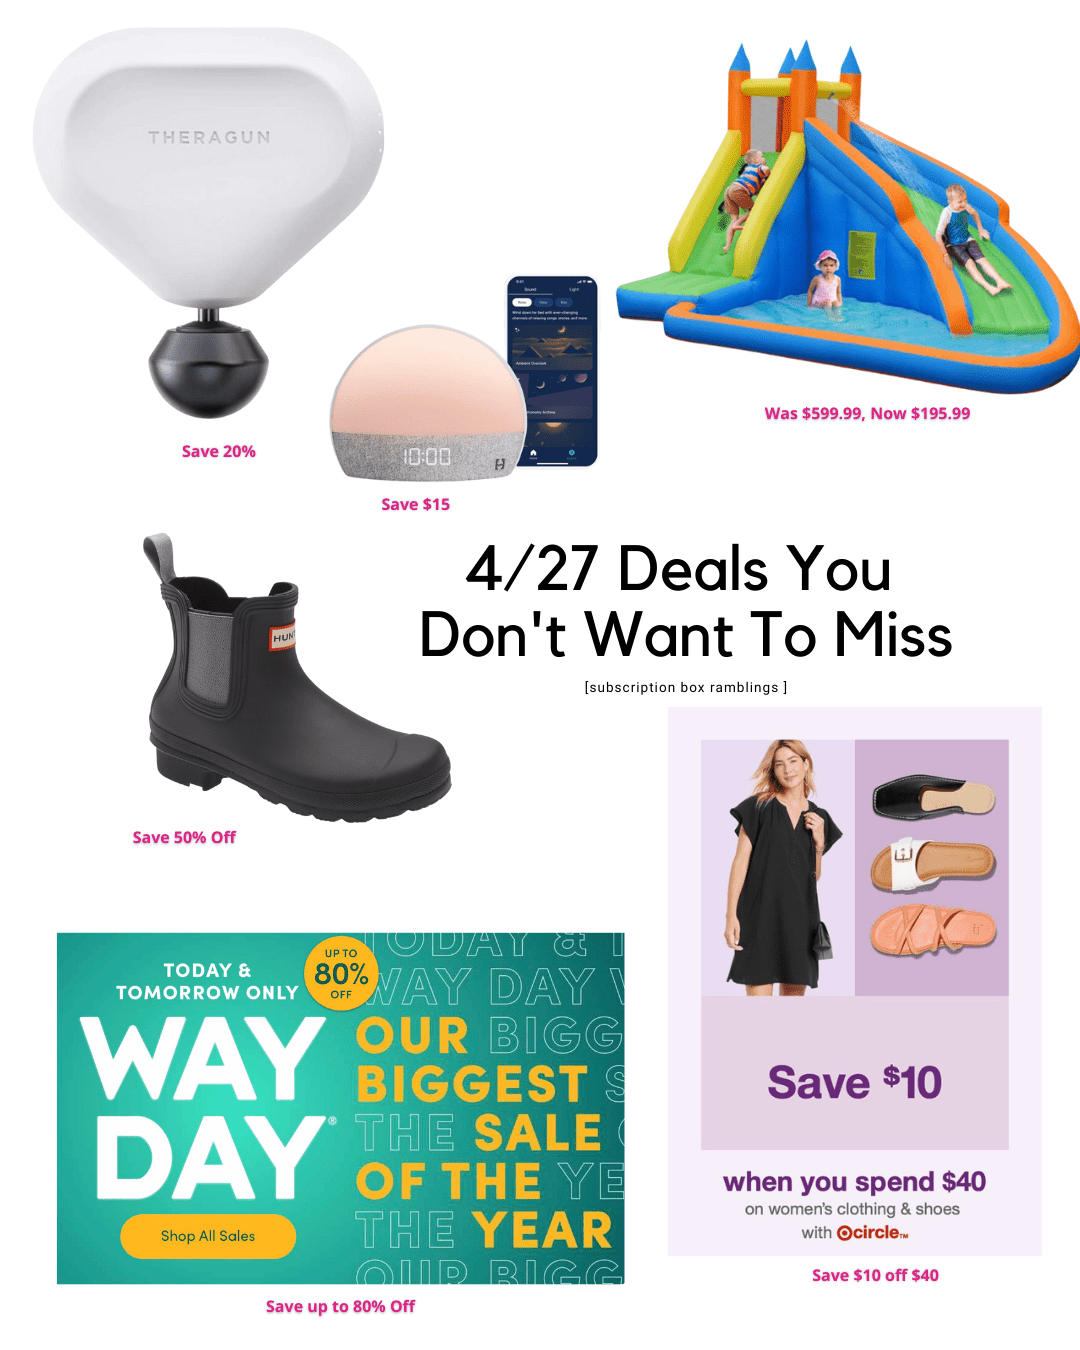 Deals You Don’t Want to Miss – 4/27